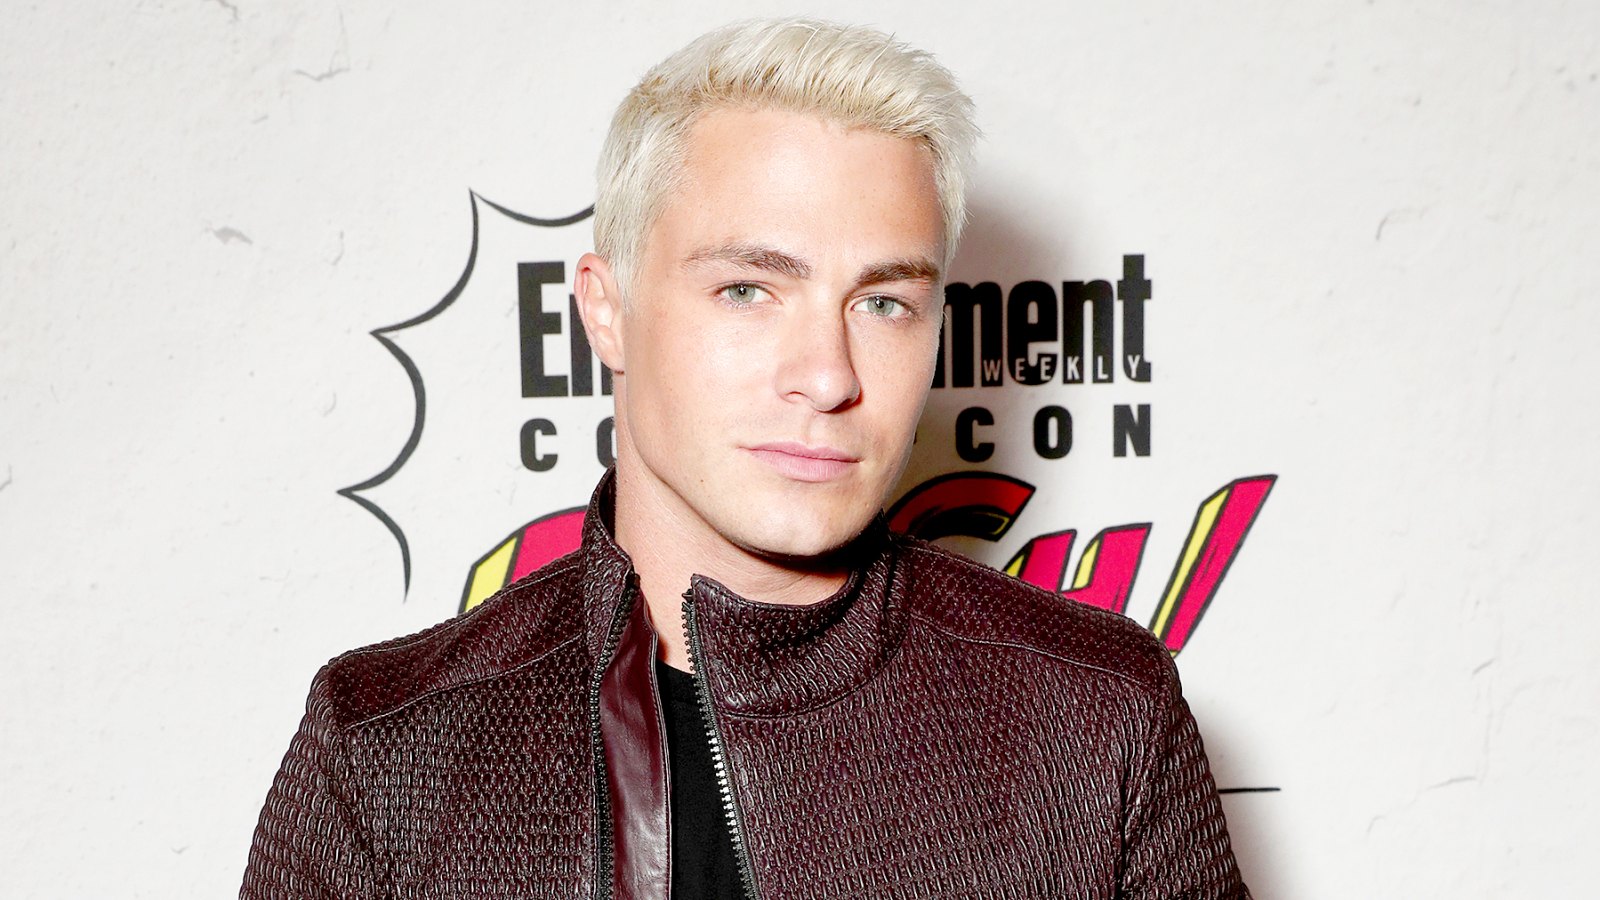 Colton Haynes at Entertainment Weekly's annual Comic-Con party in celebration of Comic-Con 2017 at Float at Hard Rock Hotel San Diego on July 22, 2017 in San Diego, California.